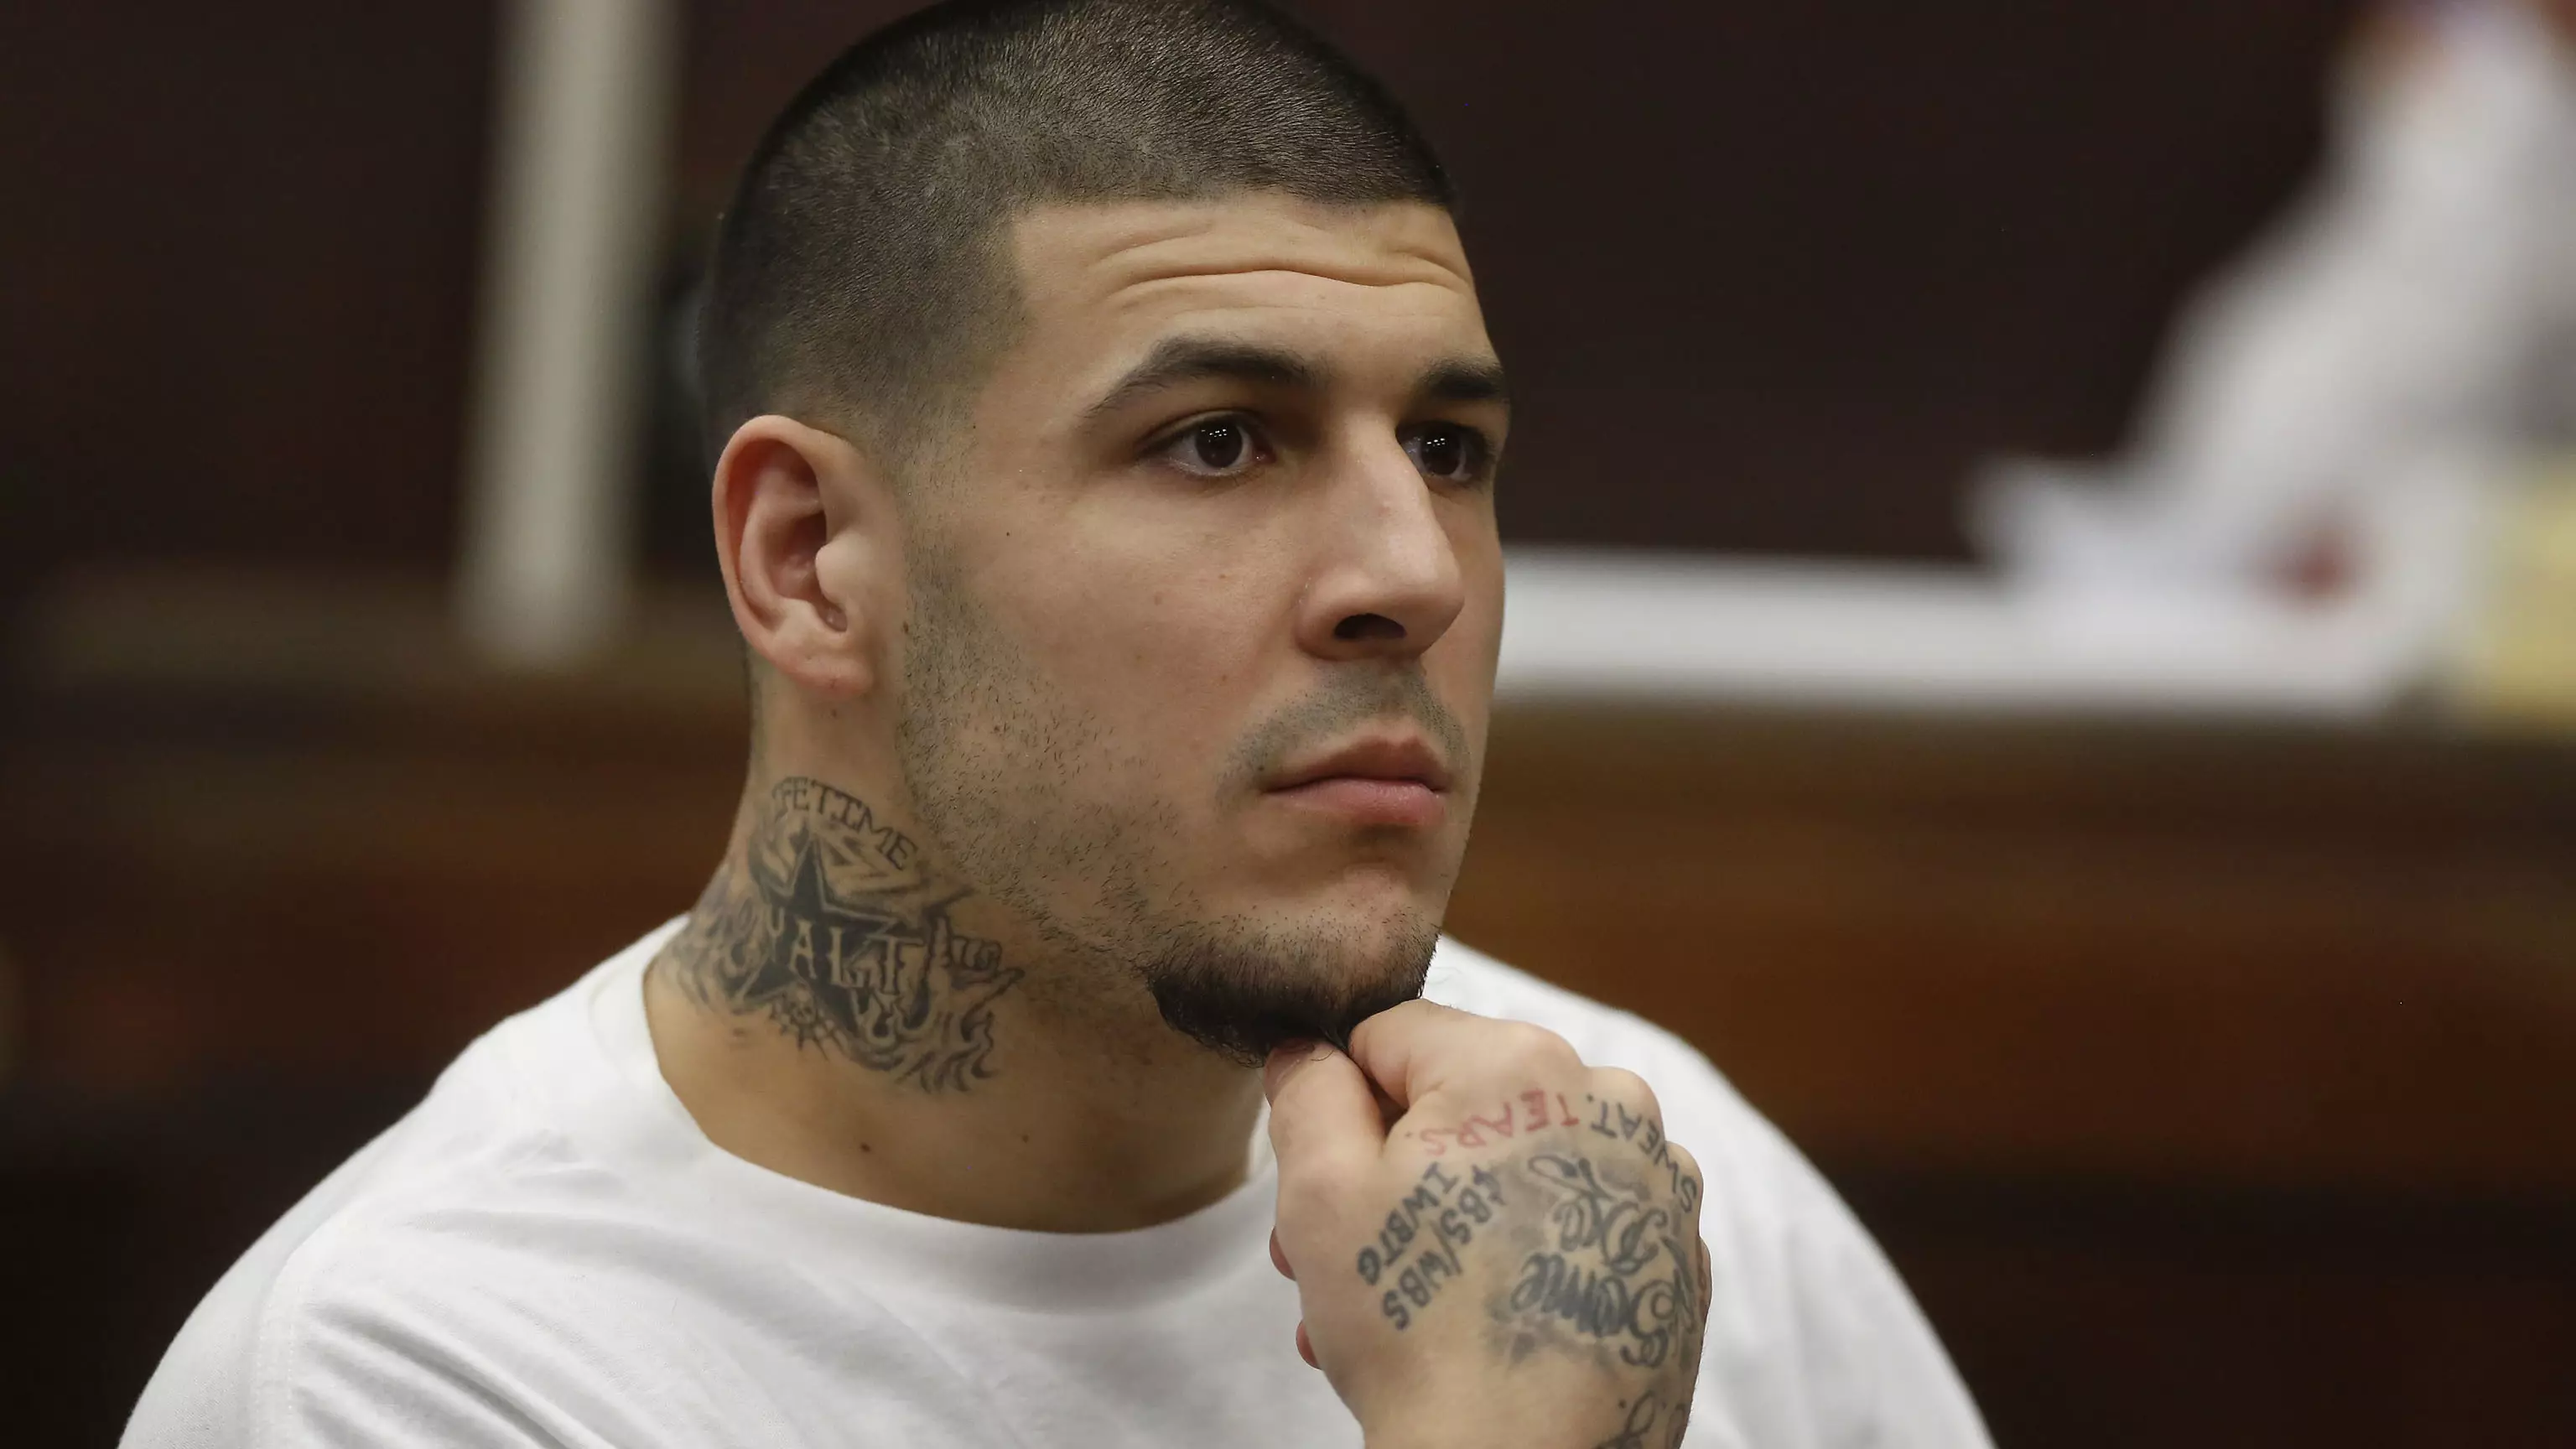 Netflix Has Dropped Trailer For New True Crime Series About Aaron Hernandez